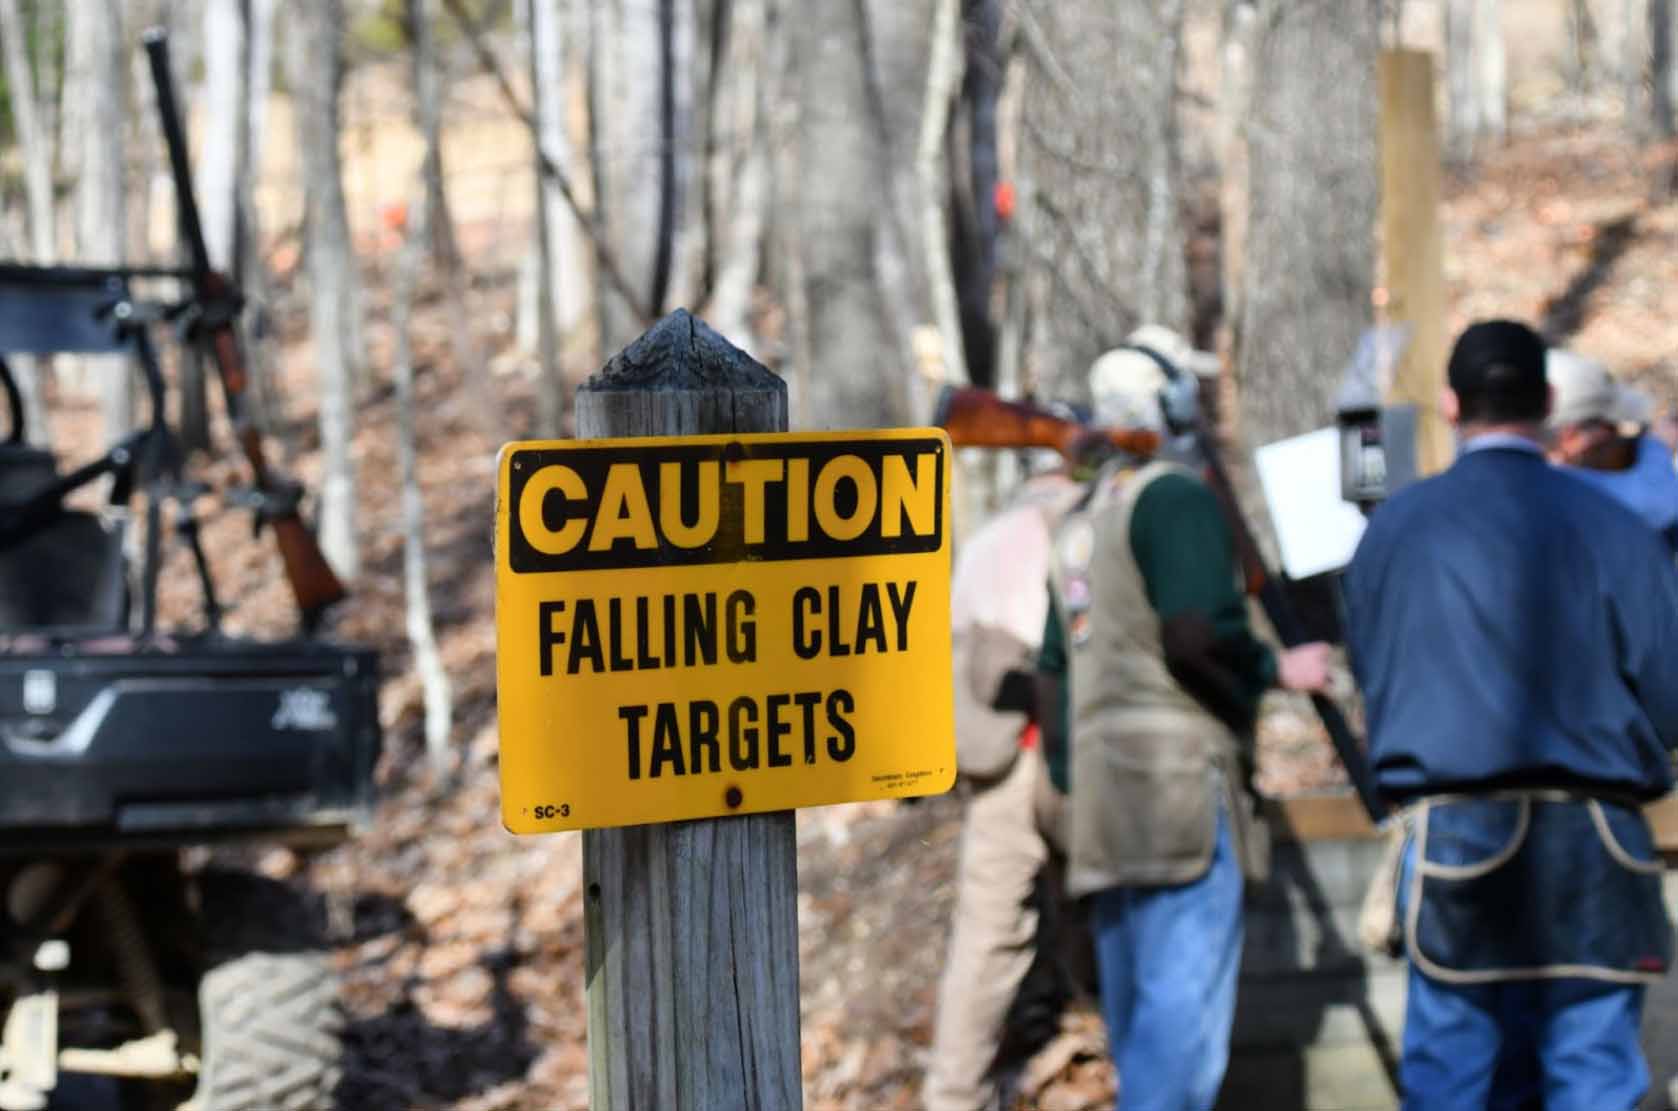 Caution: Falling Clay Targets sign with a blurred background of men holding shotguns at a shooting range.